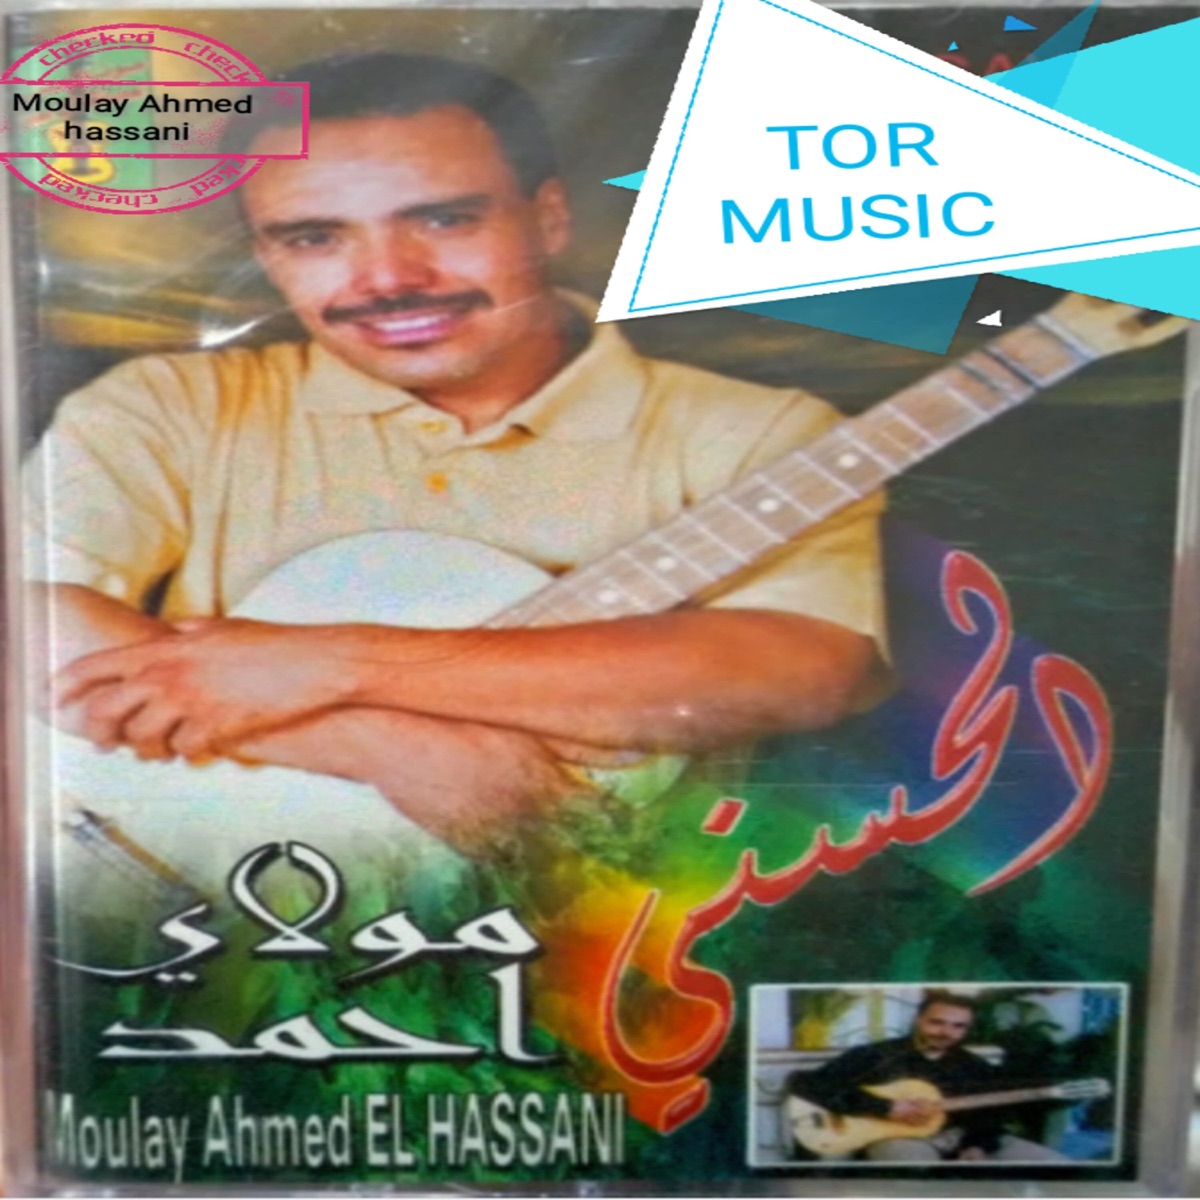 The Best of Moulay Ahmed El Hassani, Vol. 1: Yami Matbkich par Moulay Ahmed  El Hassani sur Apple Music